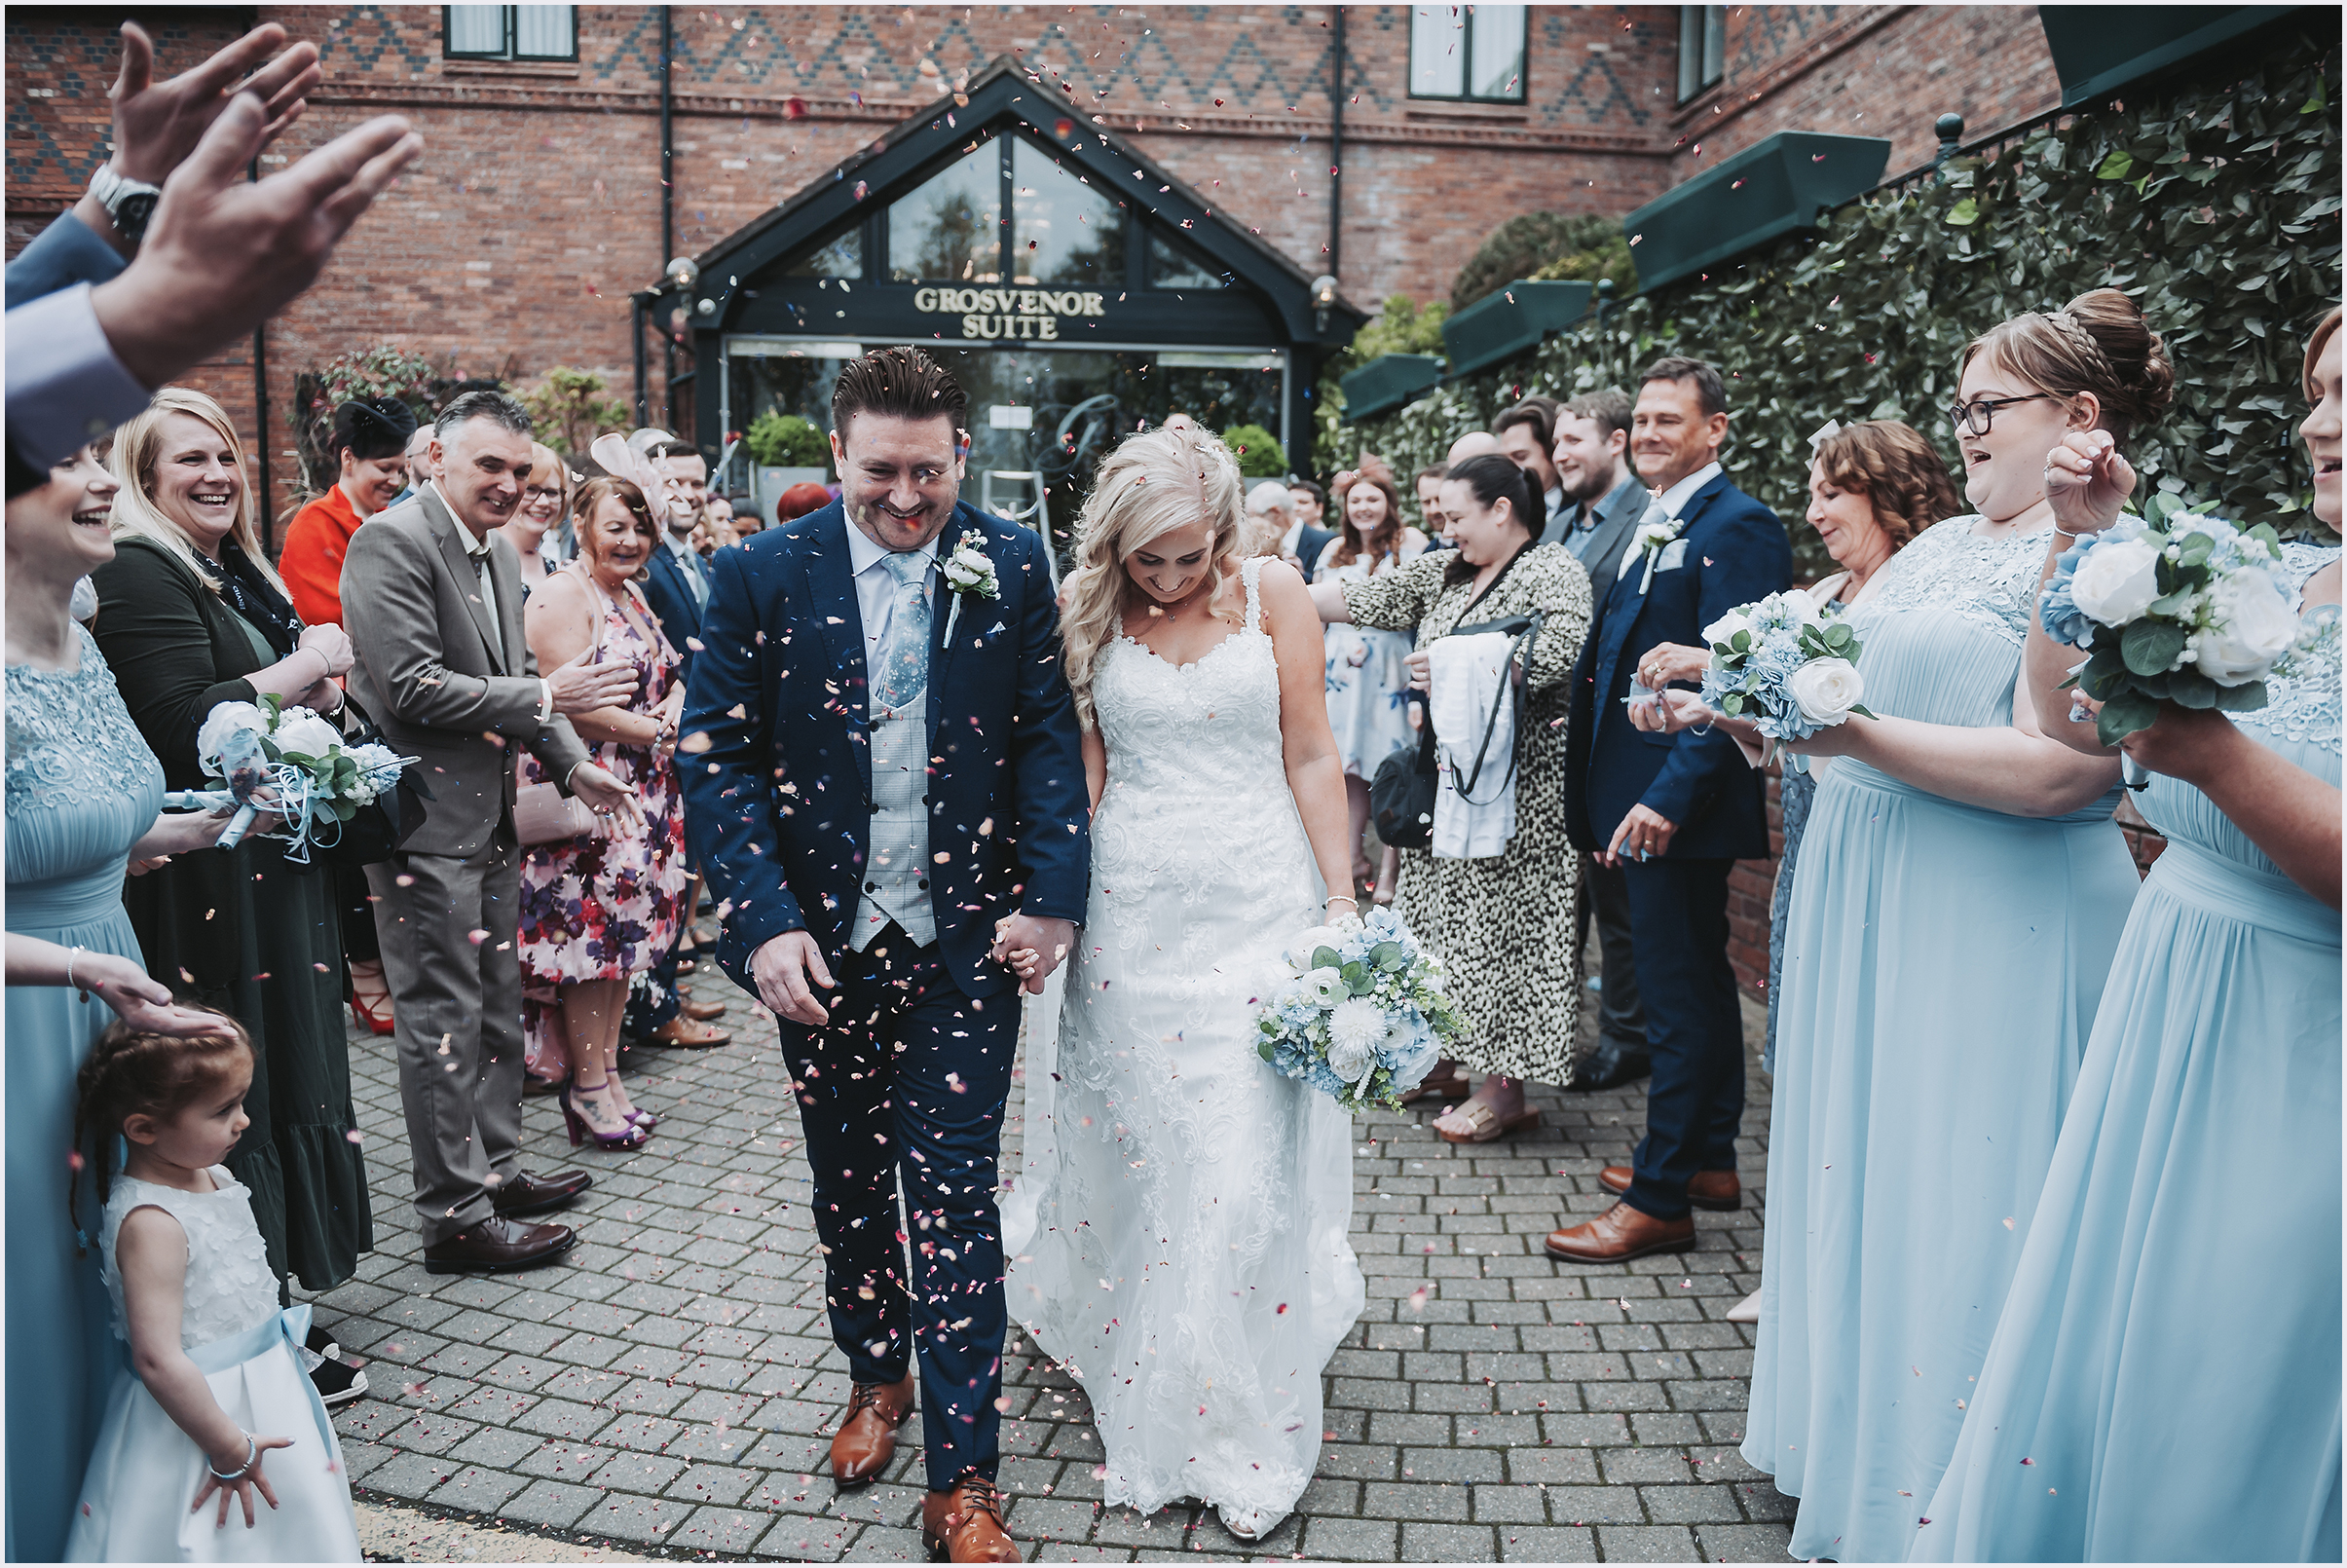 A newly married couple beam with happiness as their guests throw confetti at the after their wedding ceremony at The Grosvenor Pulford Hotel and Spa.